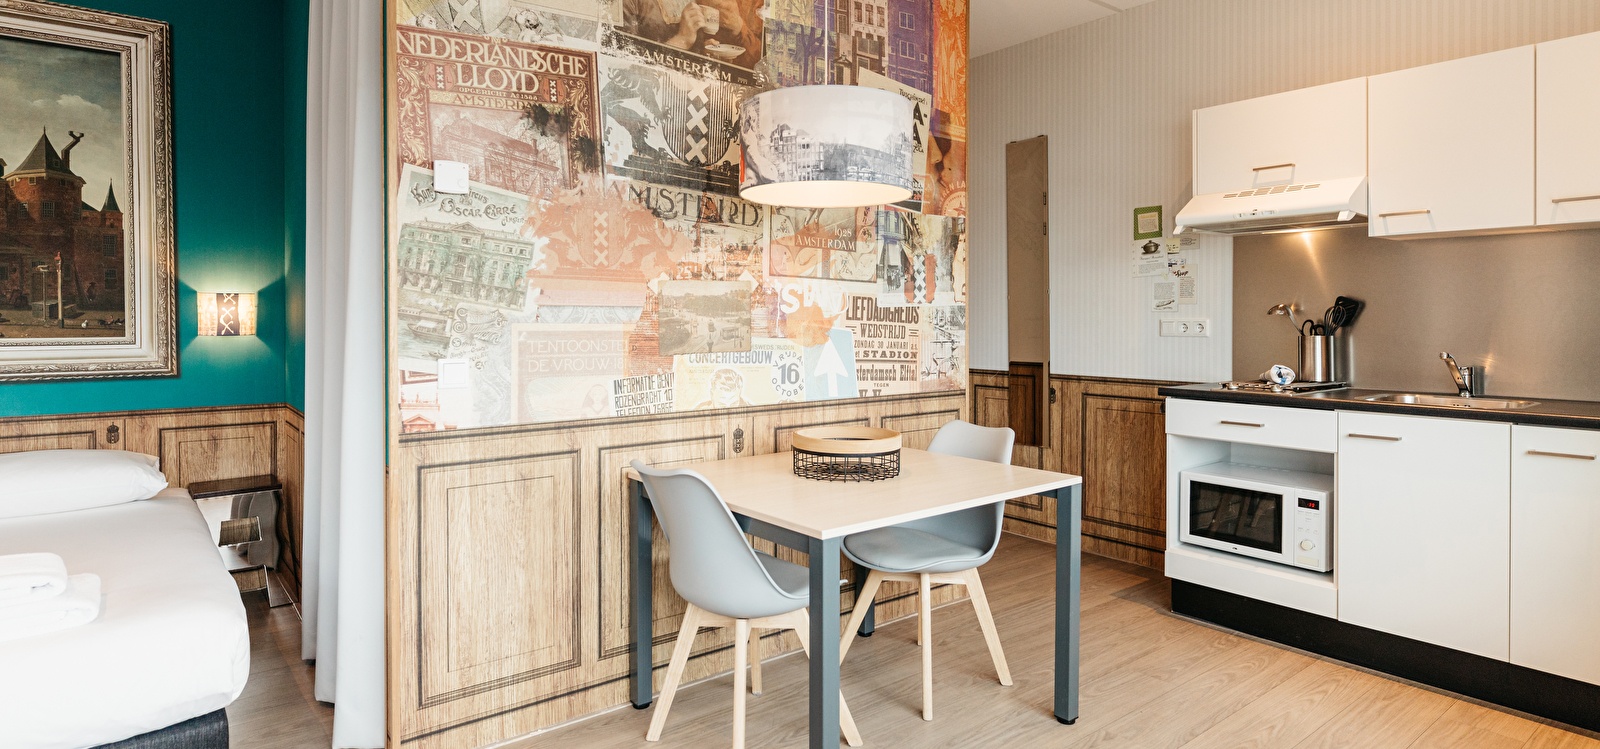 dining table and kitchen Studio apartment - ID APARTHOTEL